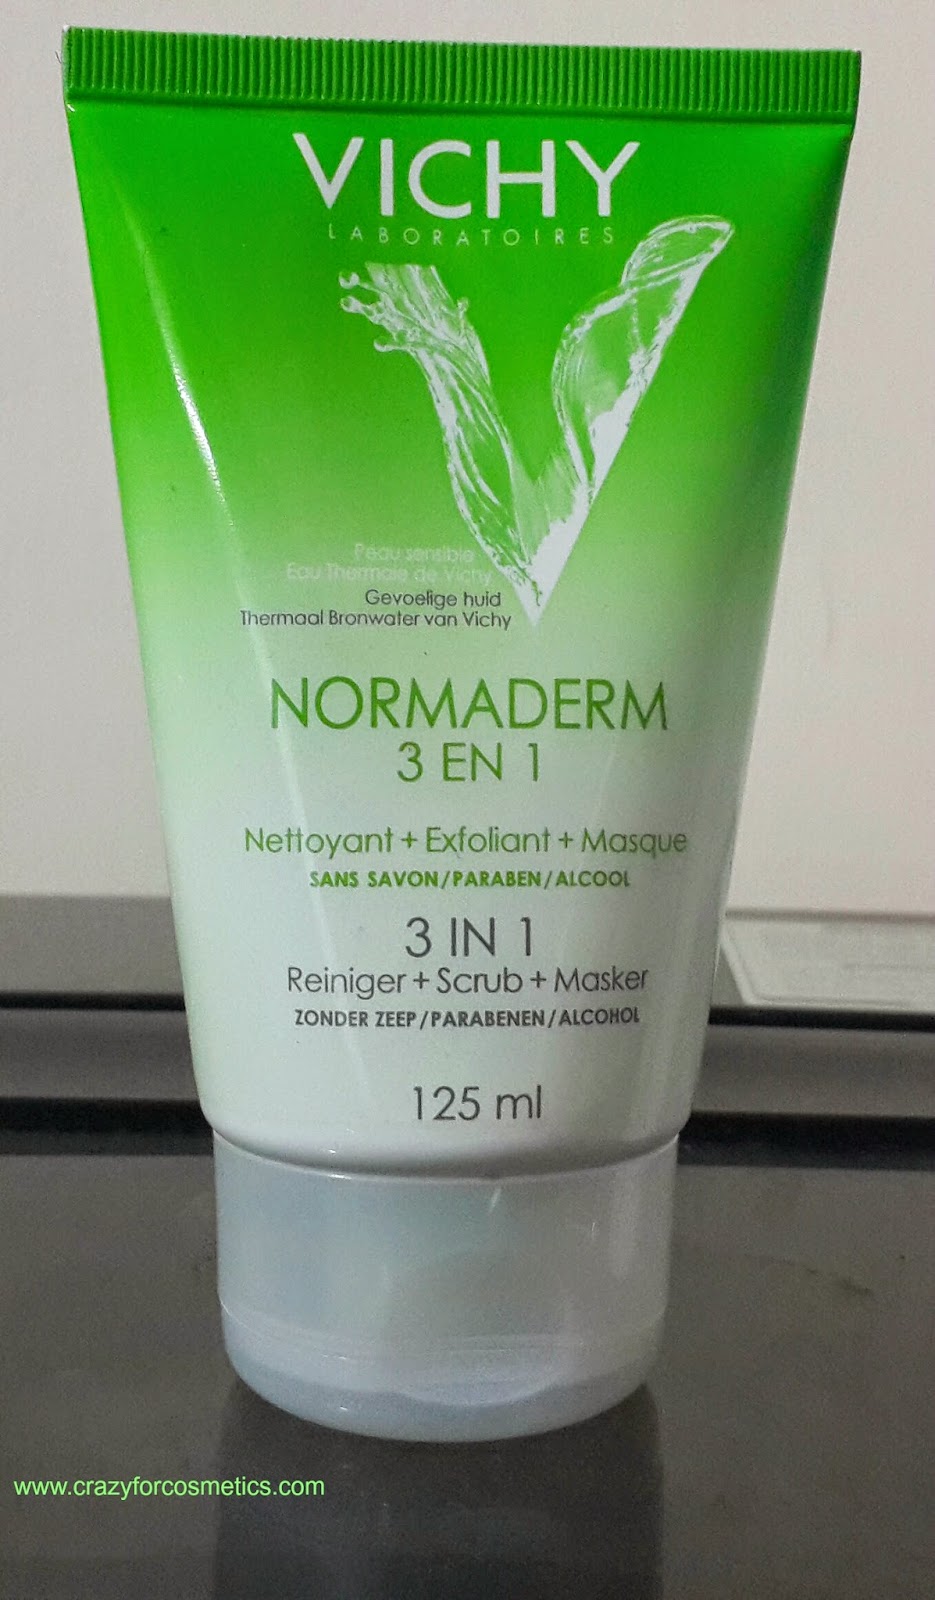 Vichy Normaderm 3 in 1 Cleanser Scrub Face mask review- Vichy 3 in 1 scrub mask review- Vichy 3 in 1 Scrub Face mask price- Vichy skincare range-Vichy Paris products